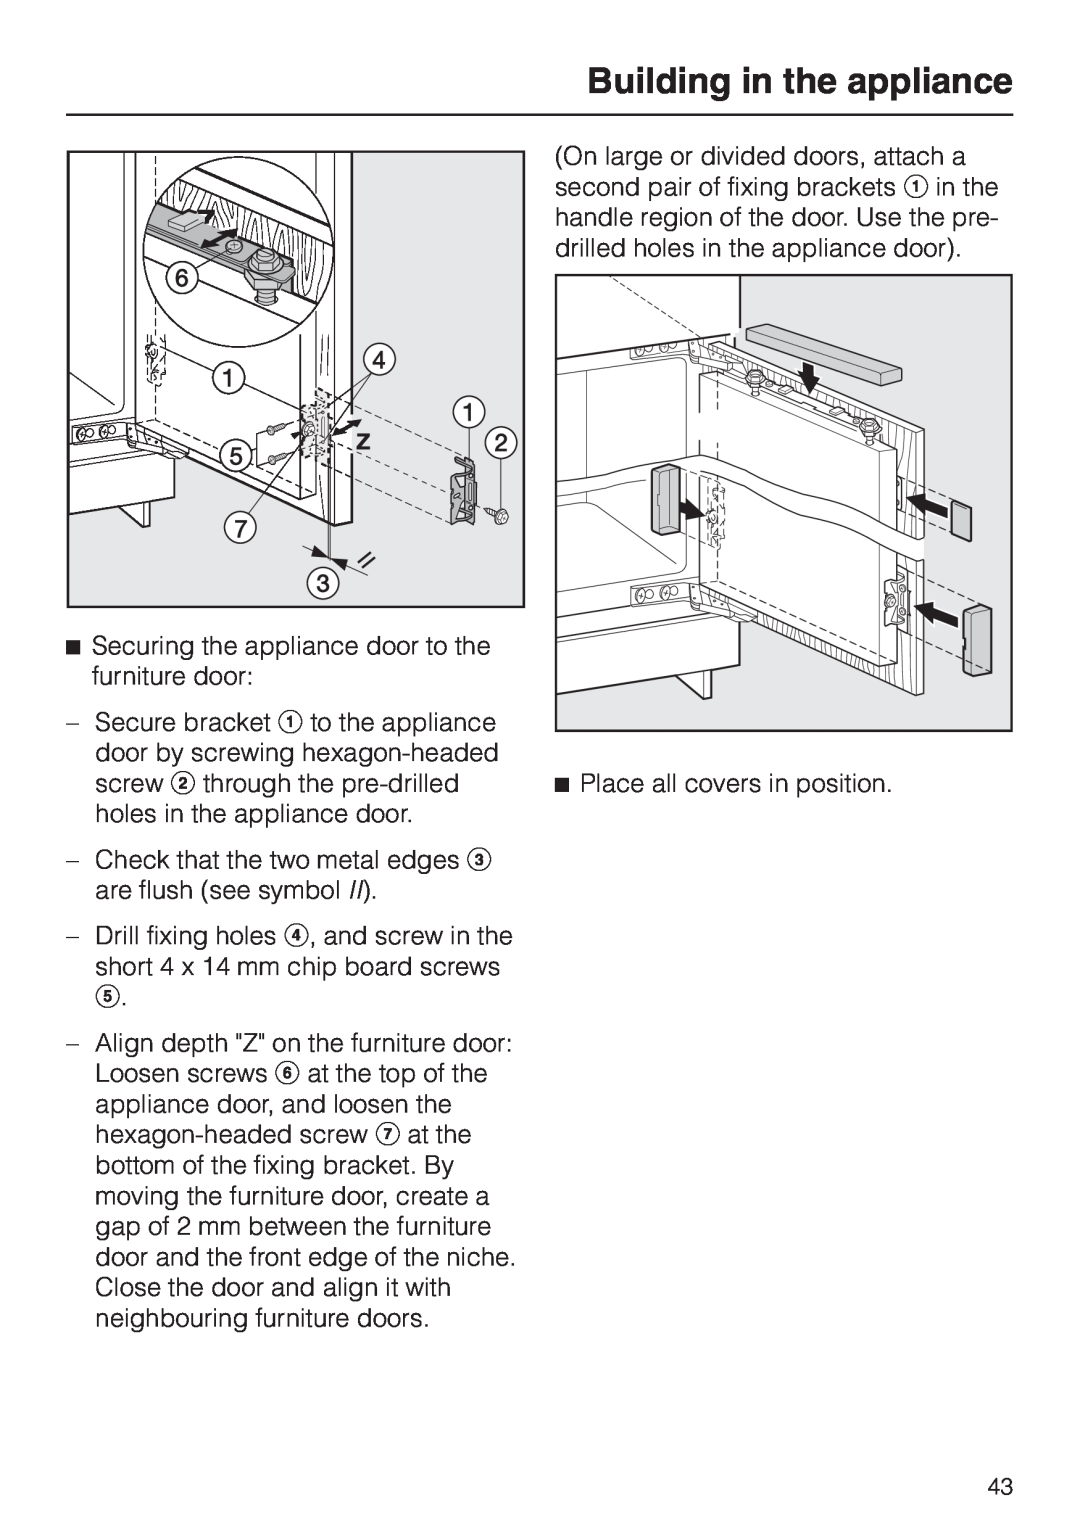 Miele F 456 i-3 installation instructions Place all covers in position, Building in the appliance 